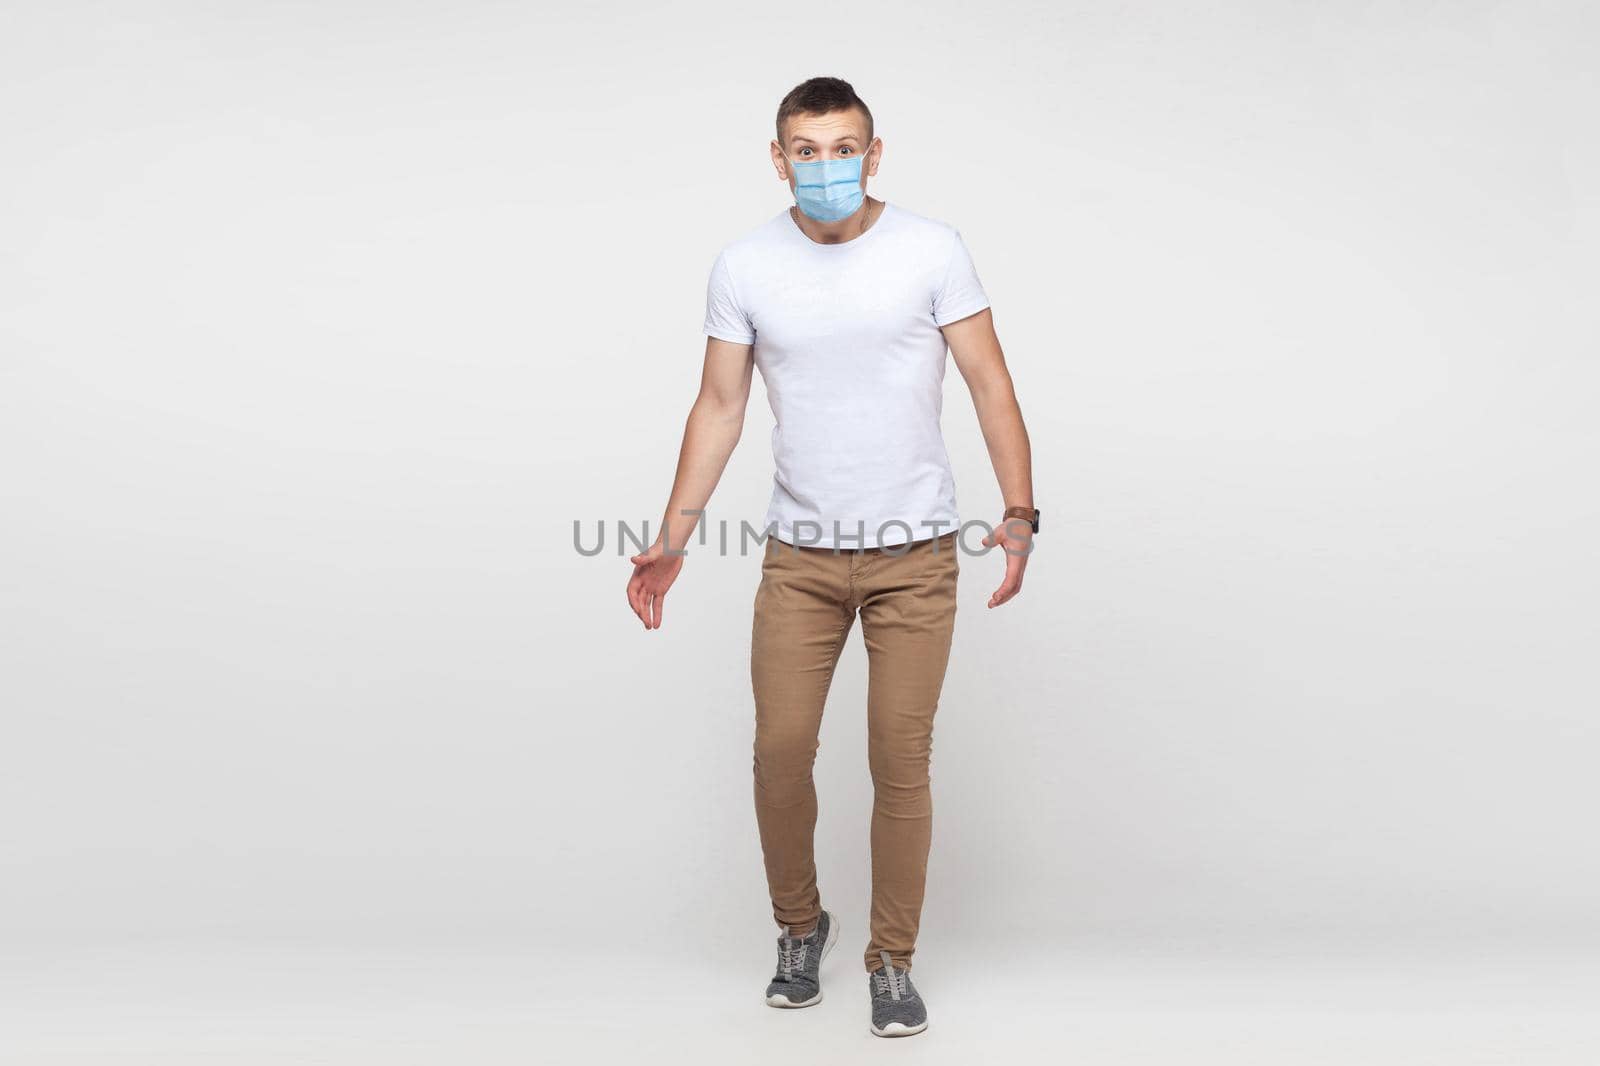 Full length portrait of amazed young man in white shirt with surgical medical mask standing with big eyes and looking at camera. indoor studio shot, isolated on gray background.